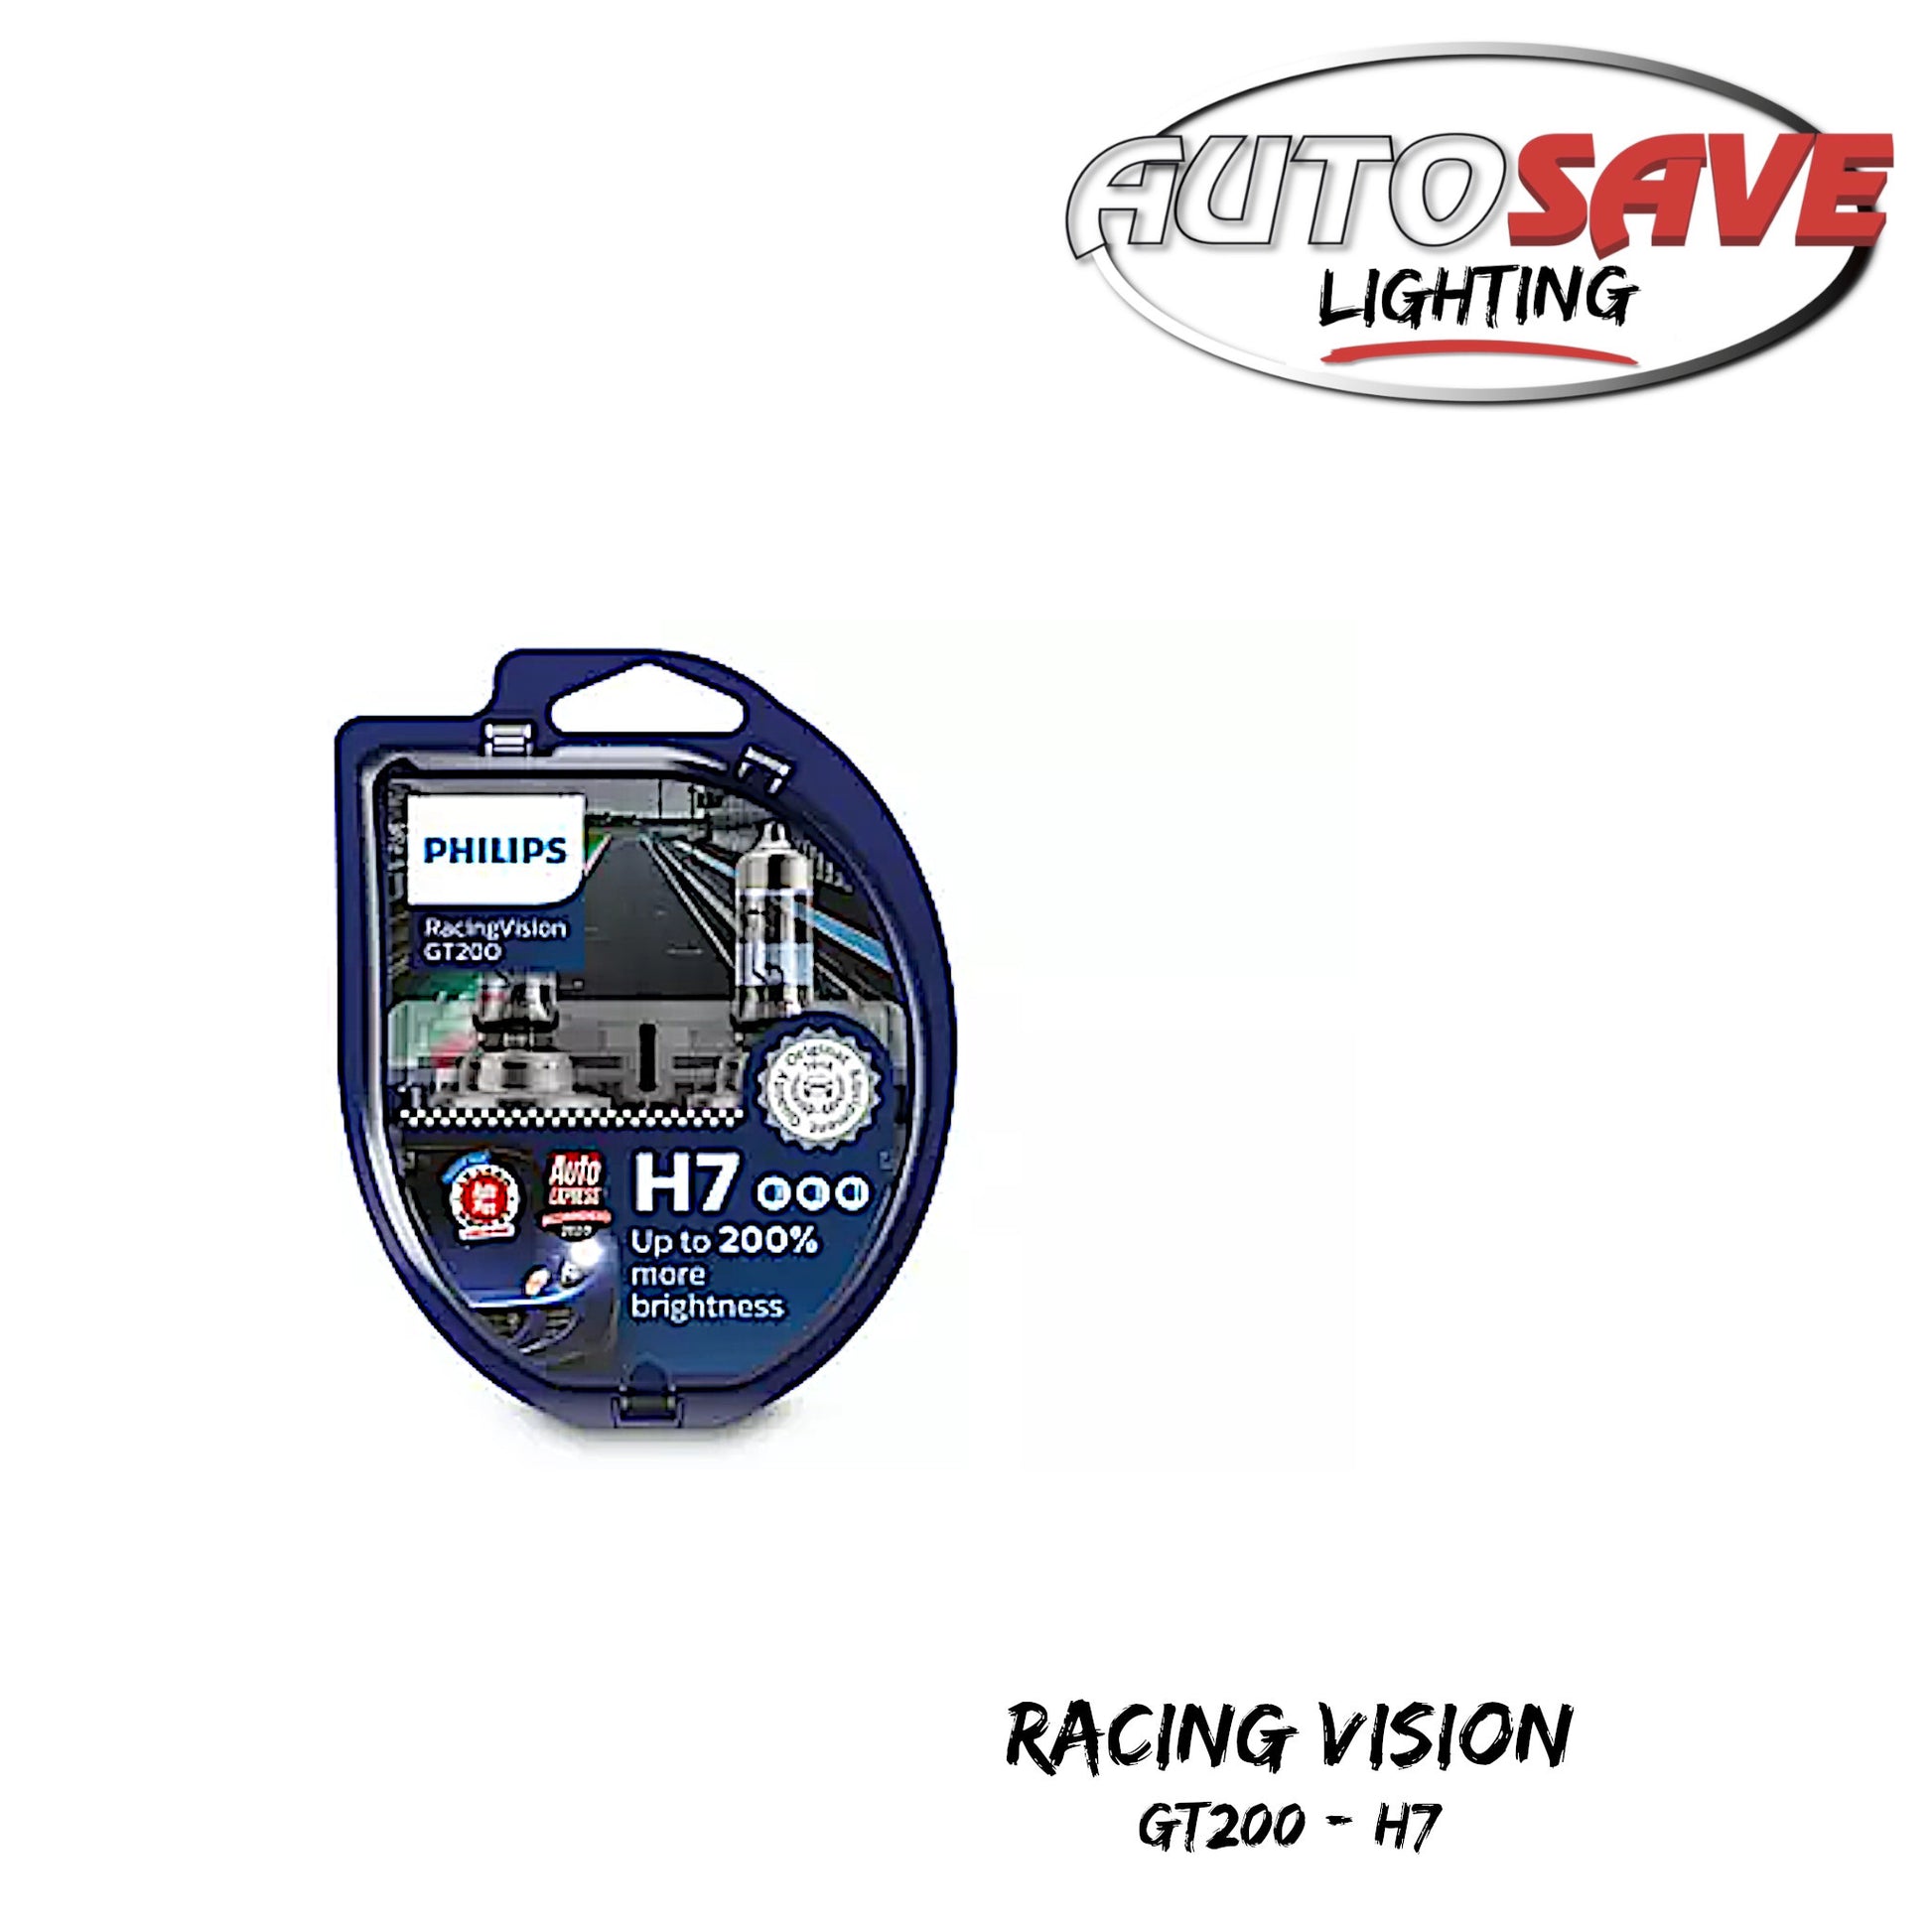 Philips Racingvision Gt200 H4 +200% Brighter Light 12v 60/55w Auto